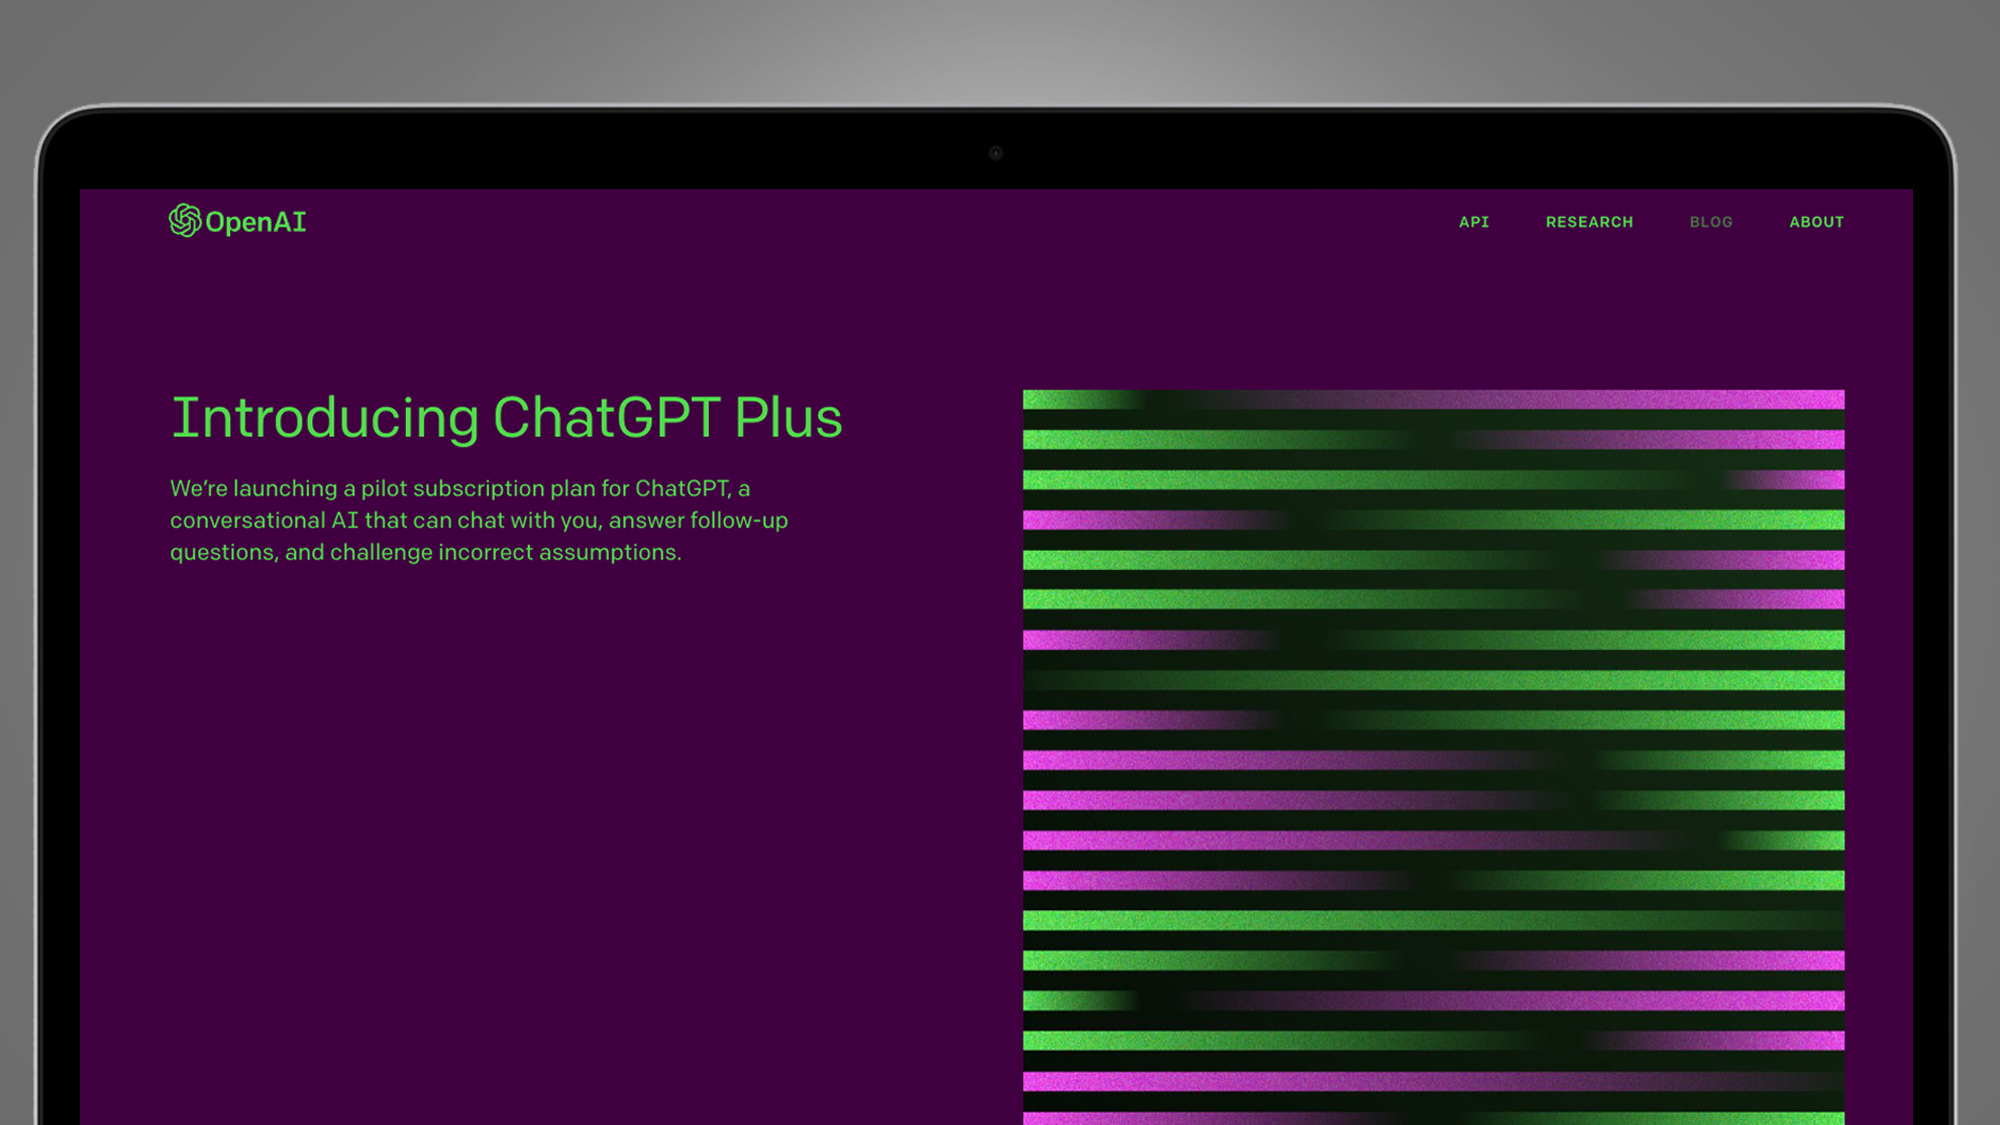 A laptop screen showing the landing page for ChatGPT Plus